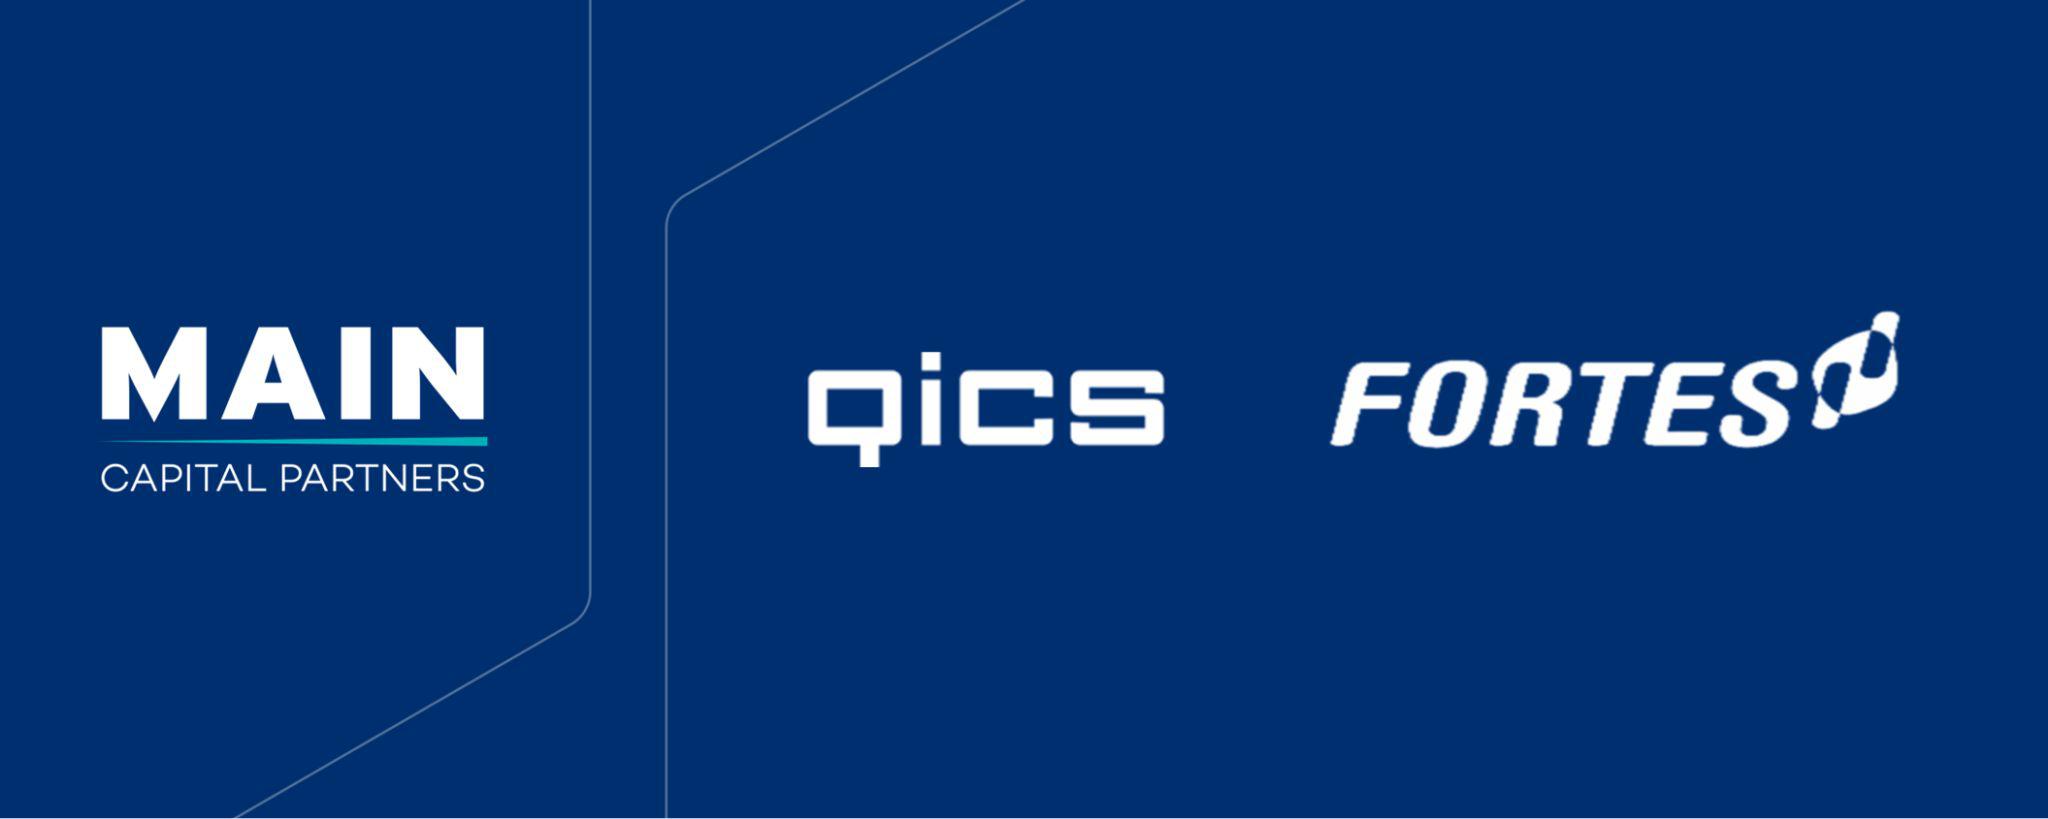 Qics expands its position in the Project &amp; Project Management (PPM) market with strategic acquisition of Fortes